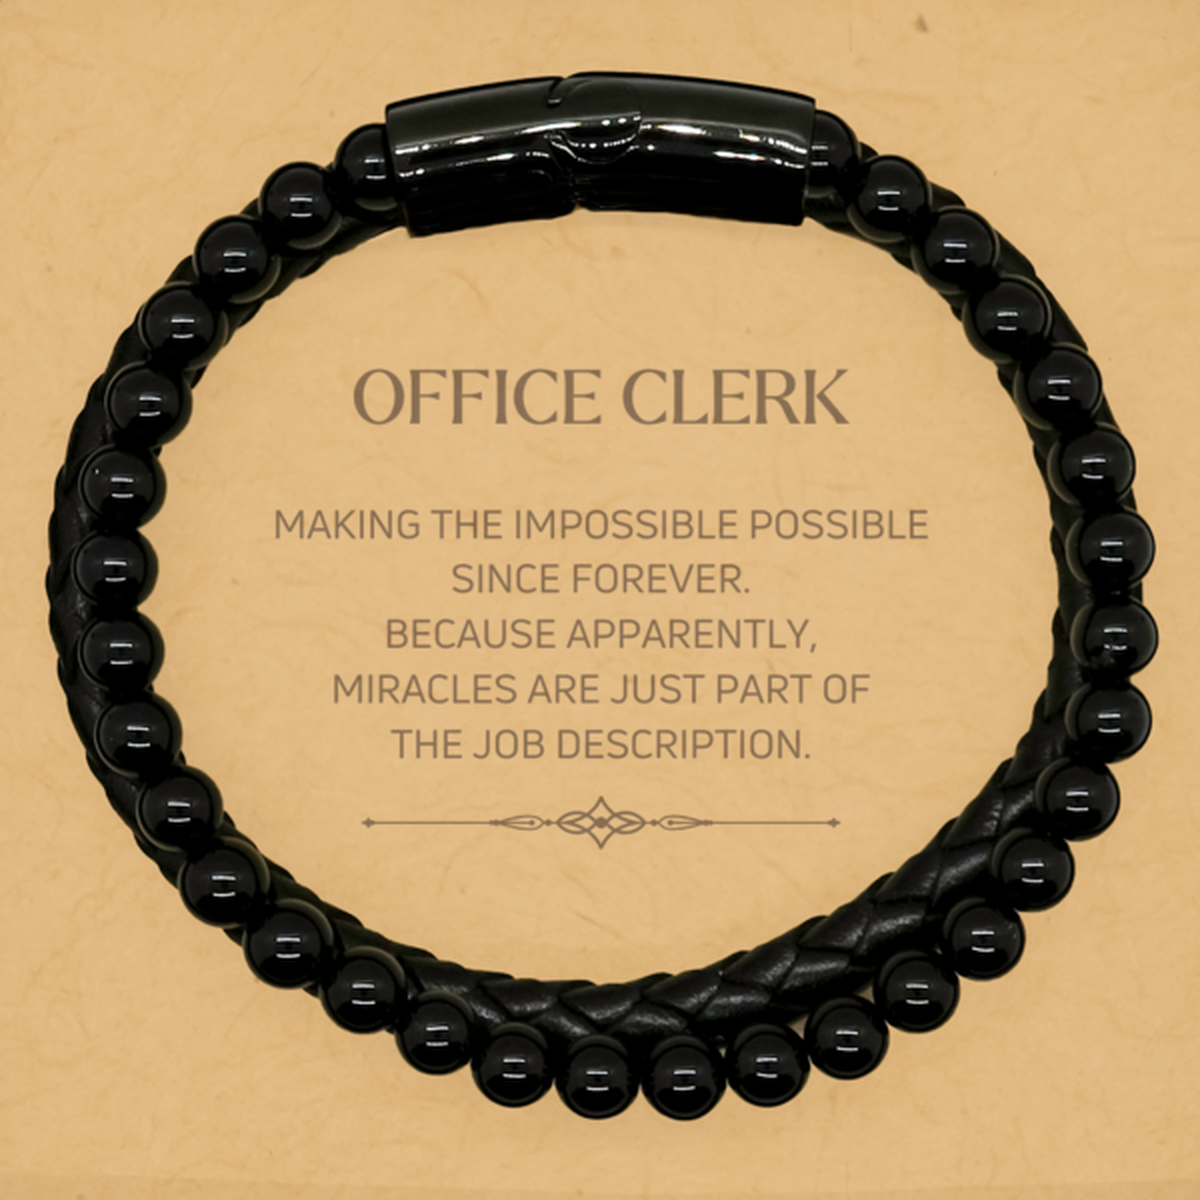 Funny Office Clerk Gifts, Miracles are just part of the job description, Inspirational Birthday Stone Leather Bracelets For Office Clerk, Men, Women, Coworkers, Friends, Boss